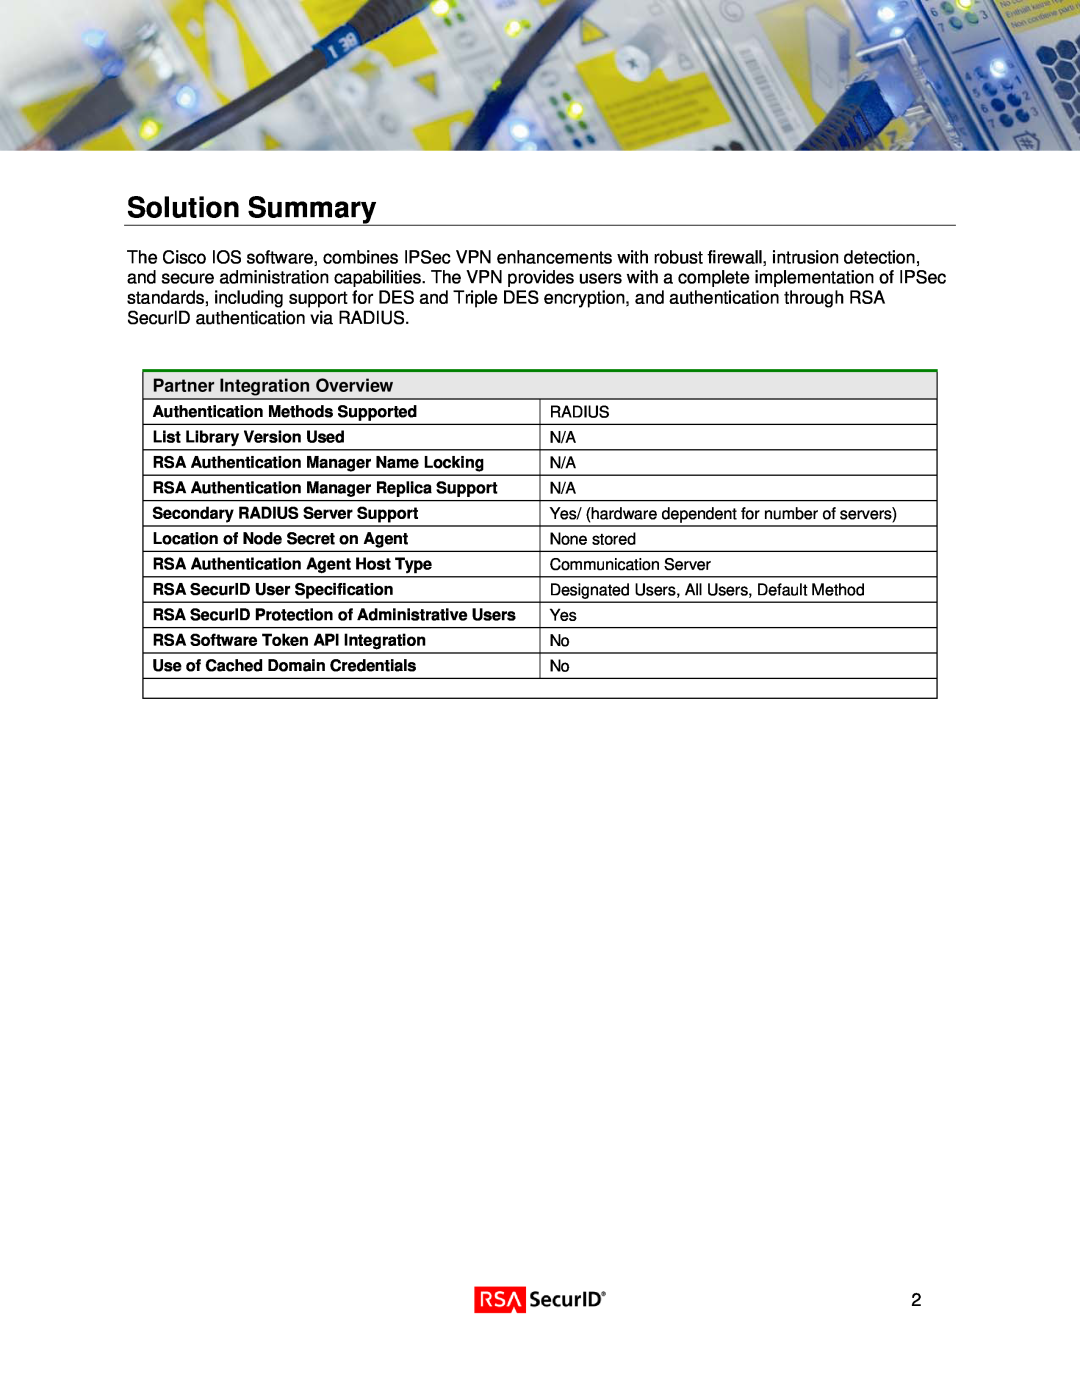 Cisco Systems IOS Router manual Solution Summary, Partner Integration Overview 